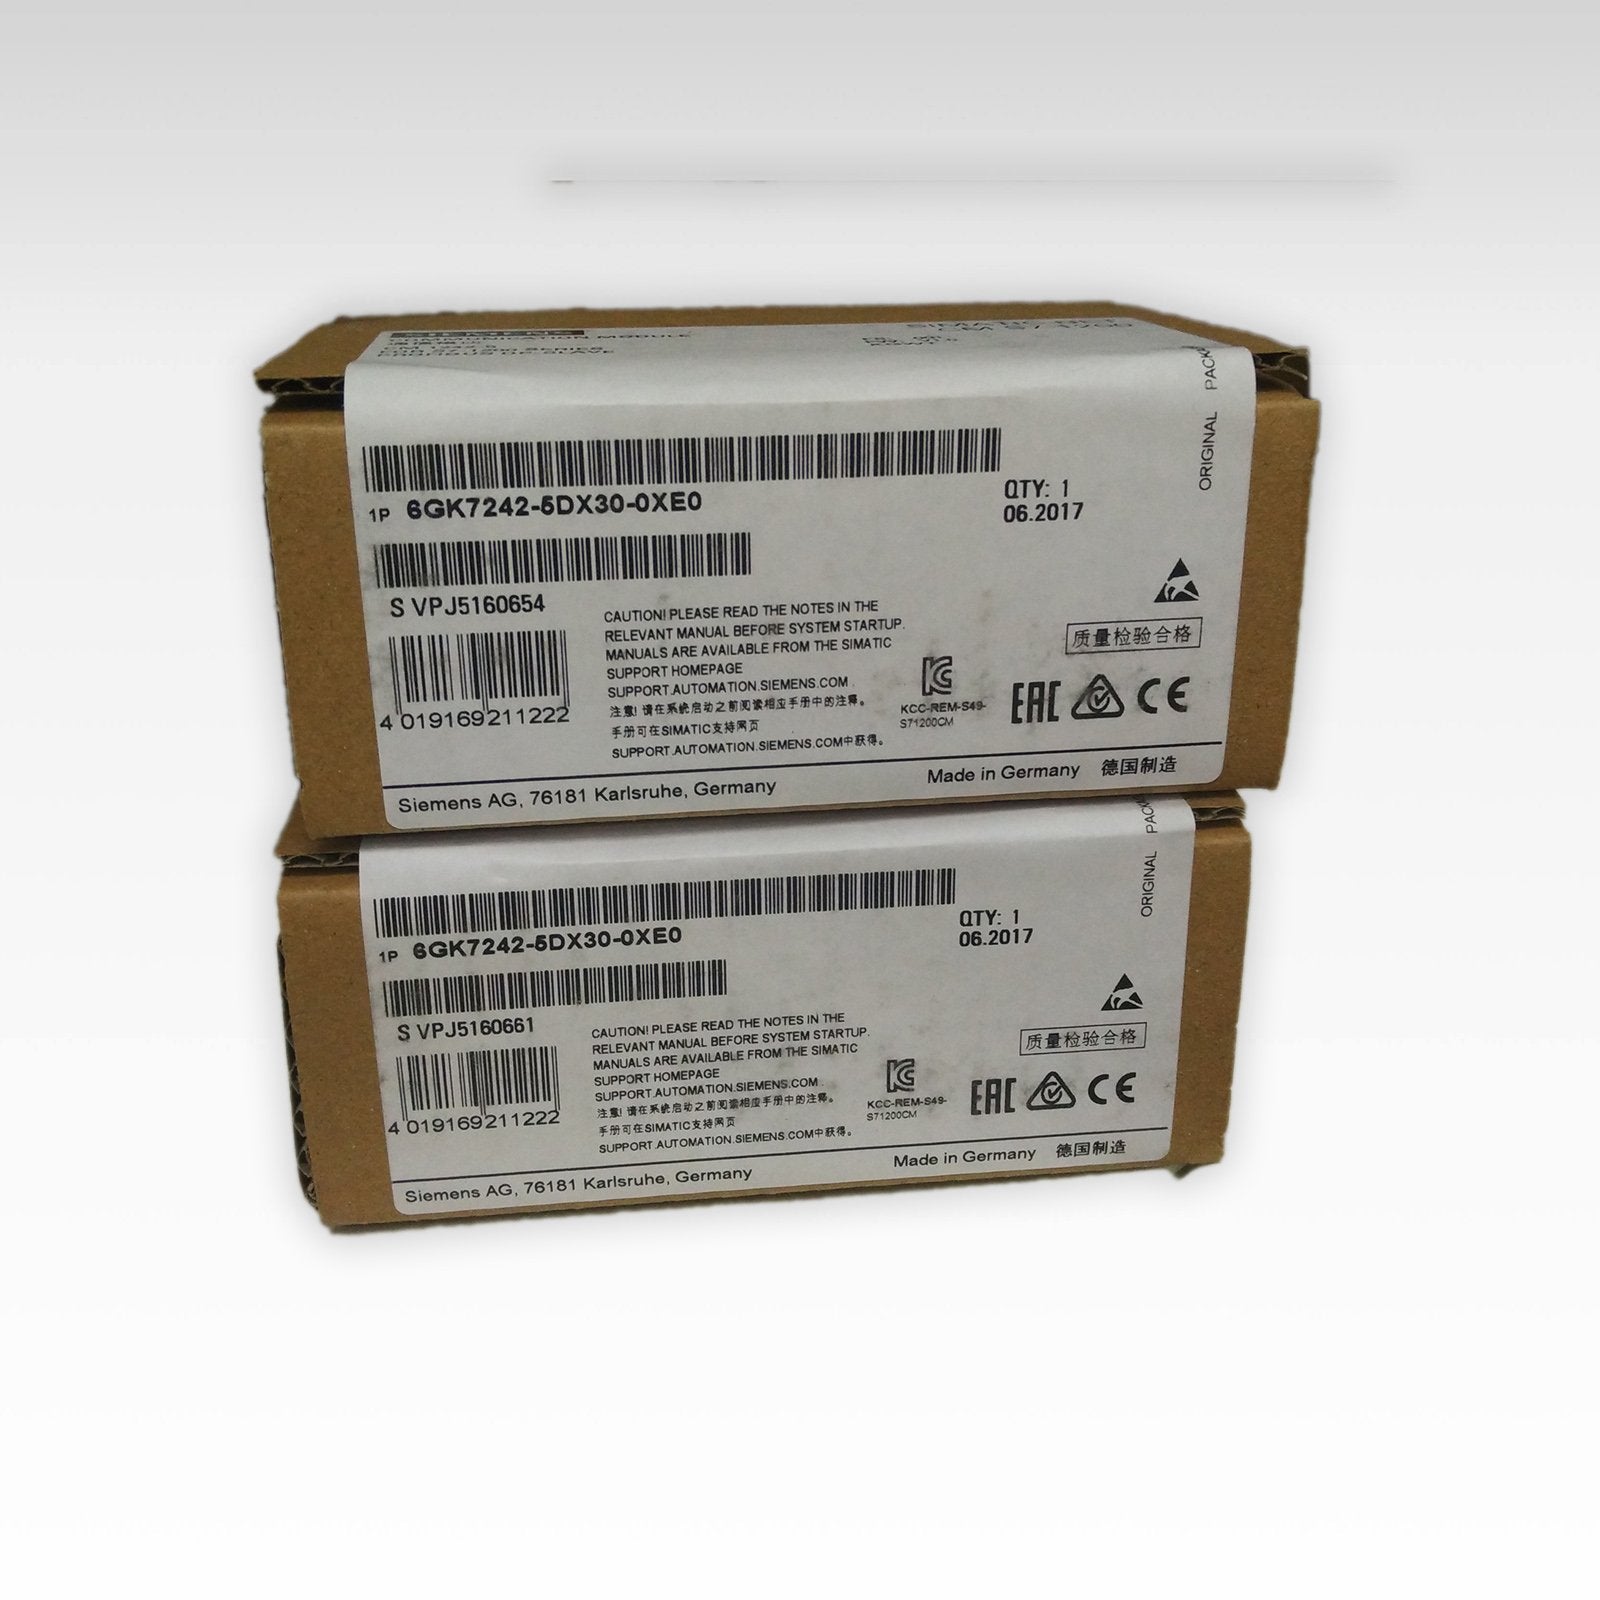 6GK7242-5DX30-0XE0 KOEED 201-500, 90%, import_2020_10_10_031751, Other, Siemens